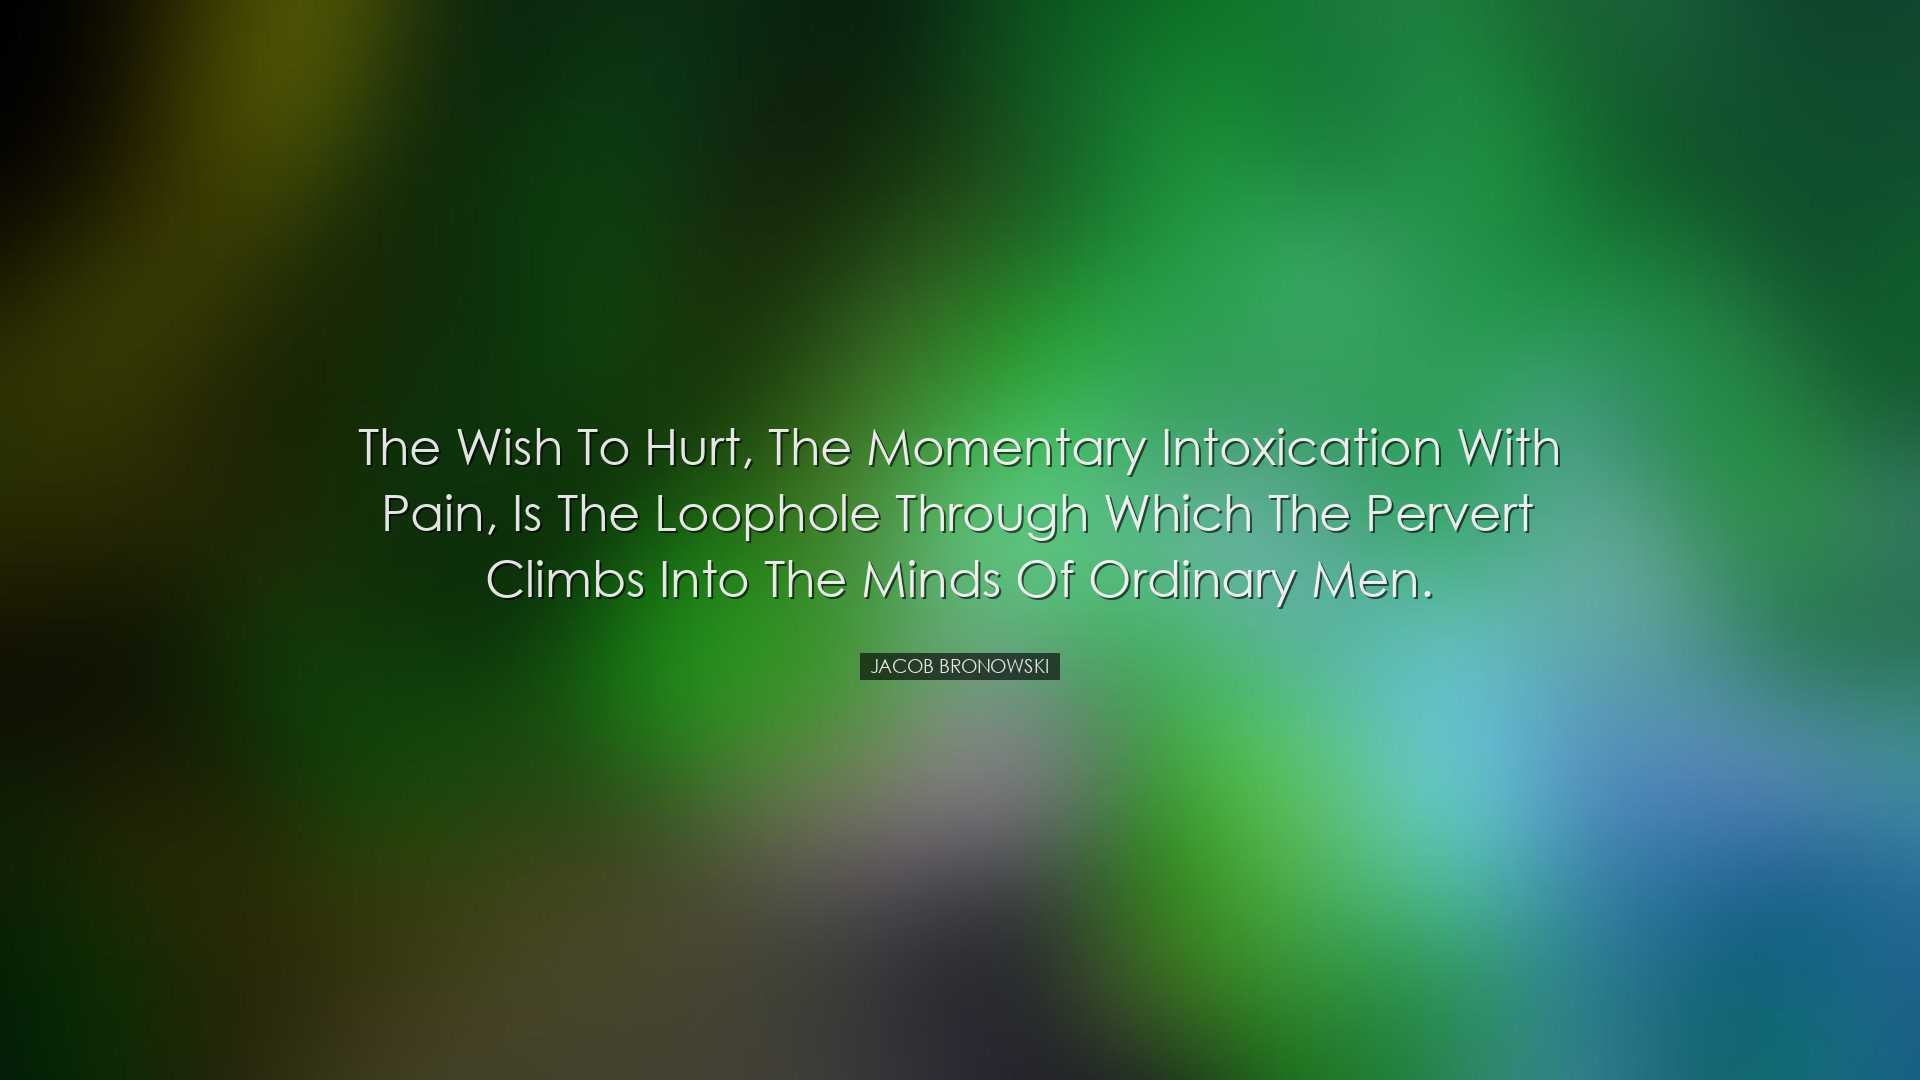 The wish to hurt, the momentary intoxication with pain, is the loo